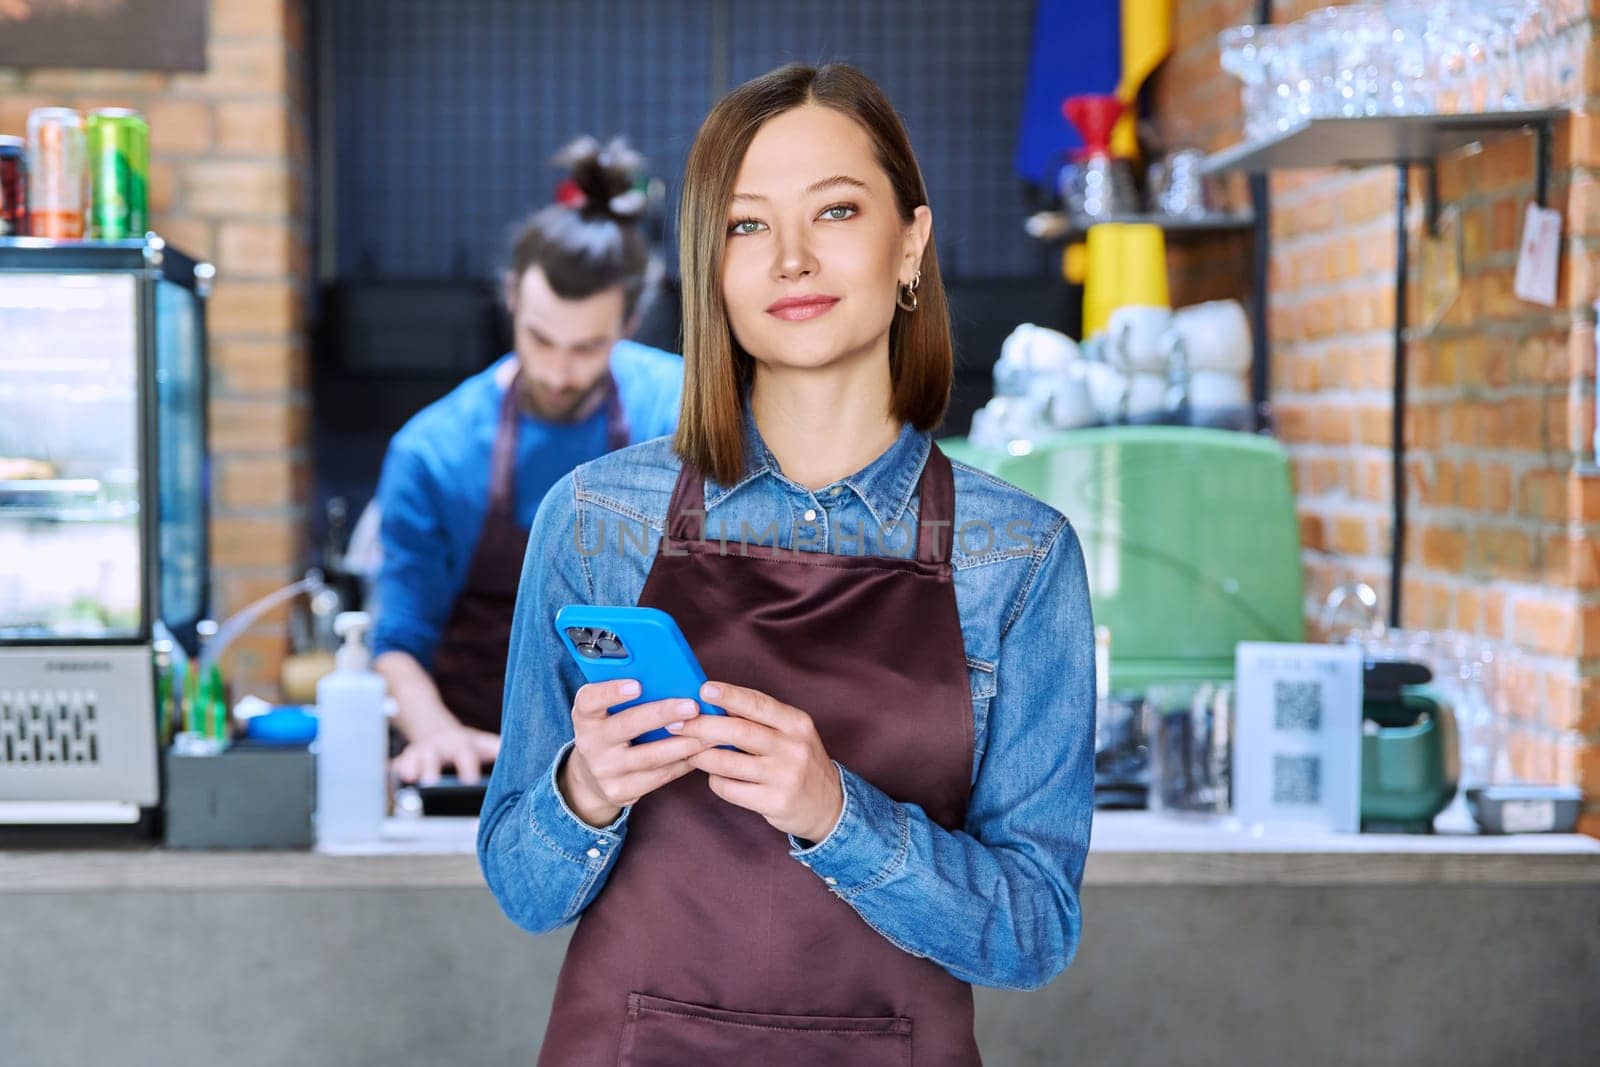 Confident successful young woman service worker in apron holding smartphone in restaurant cafeteria coffee shop pastry shop. Small business, staff, occupation, entrepreneur owner, work concept